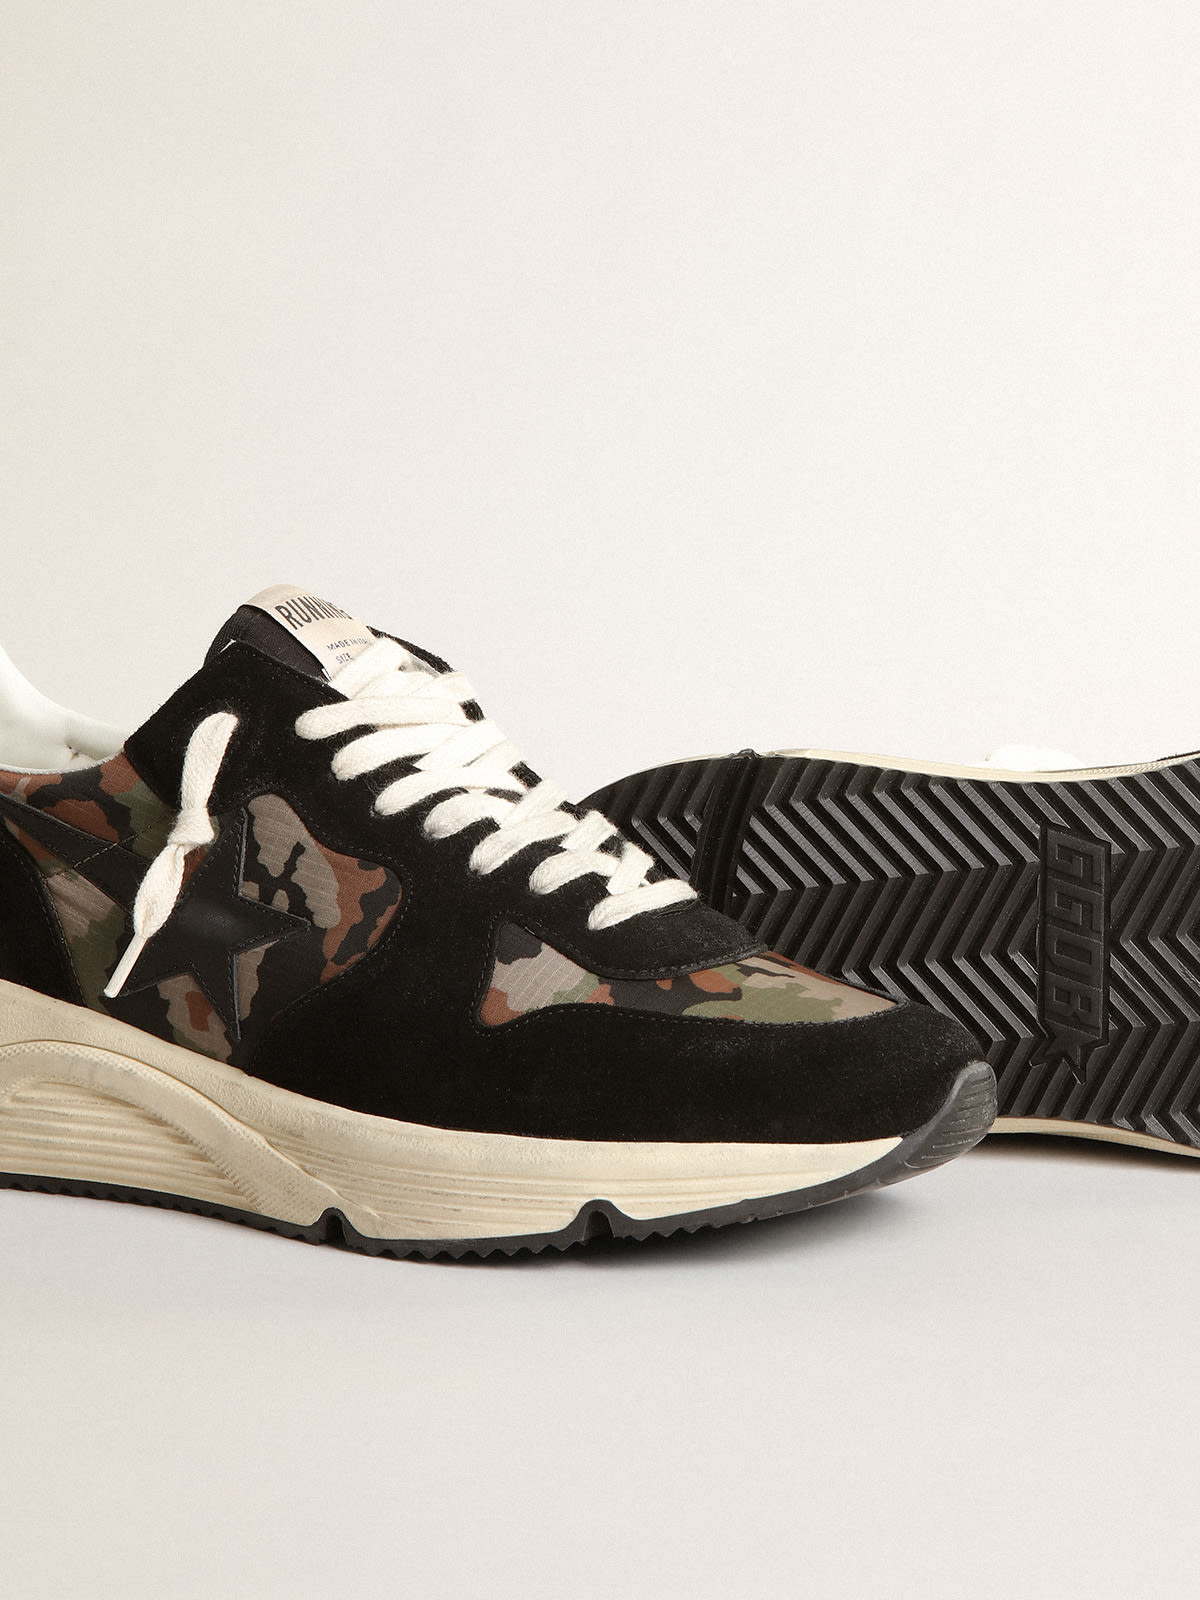 Golden Goose - Running Sole sneakers in camouflage-print ripstop nylon with black leather star in 